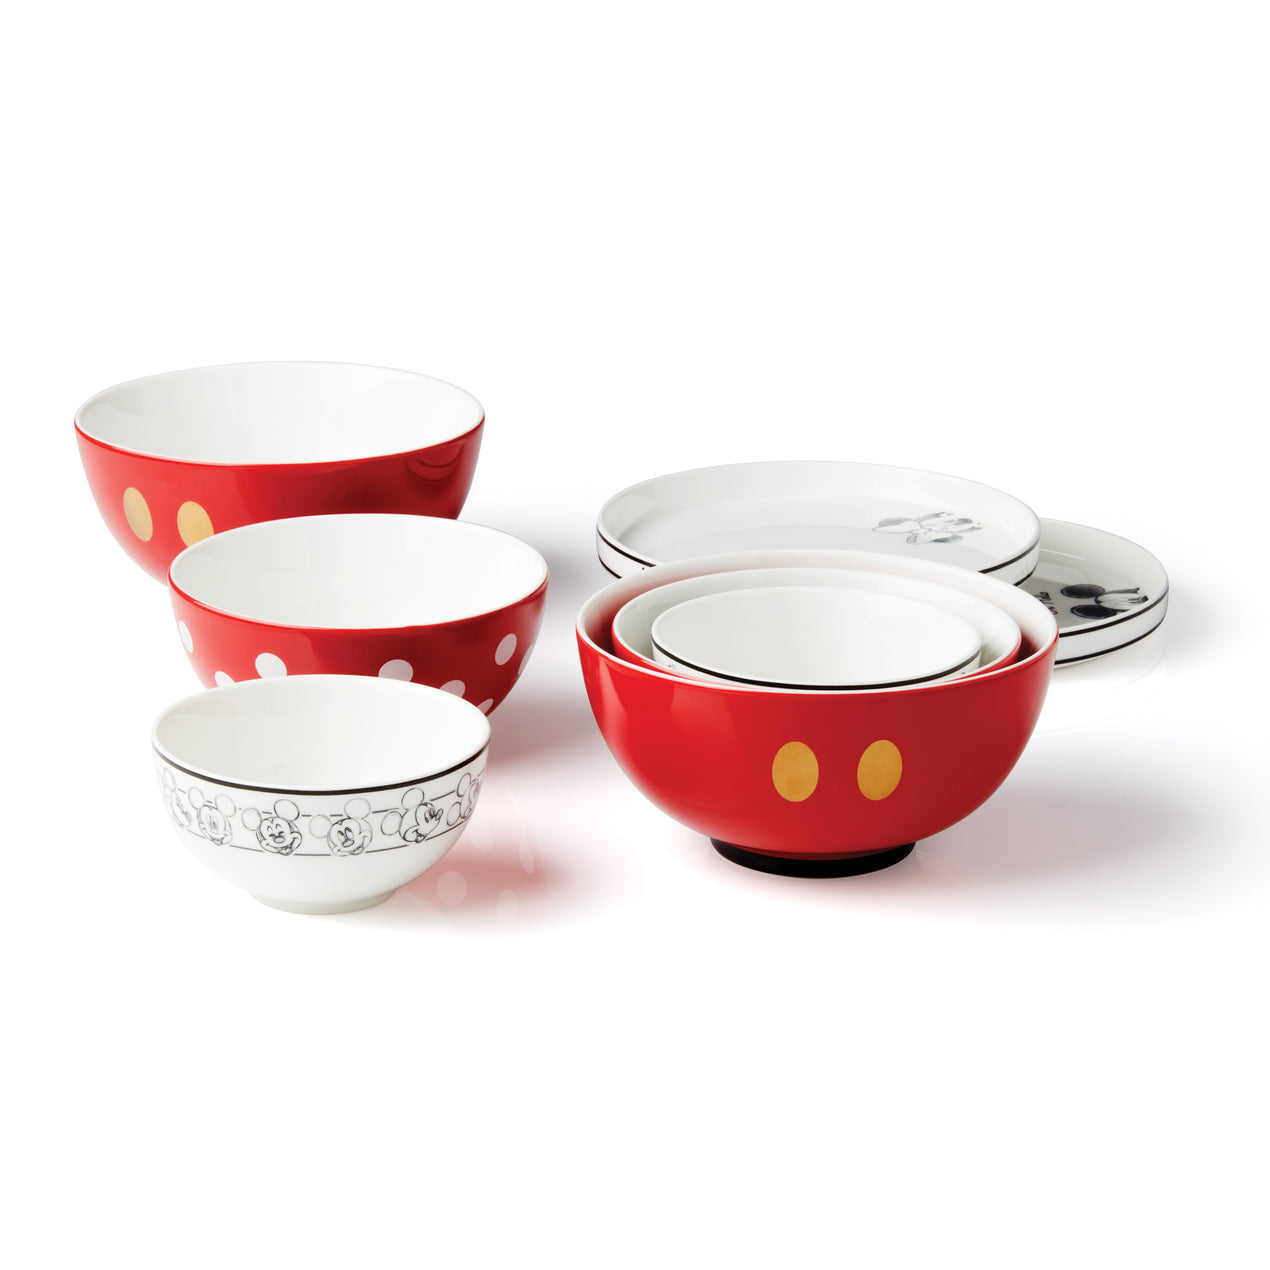 Disney Baby Mickey Mouse 3-Piece Dinner Set: Plate, Bowl and Cup